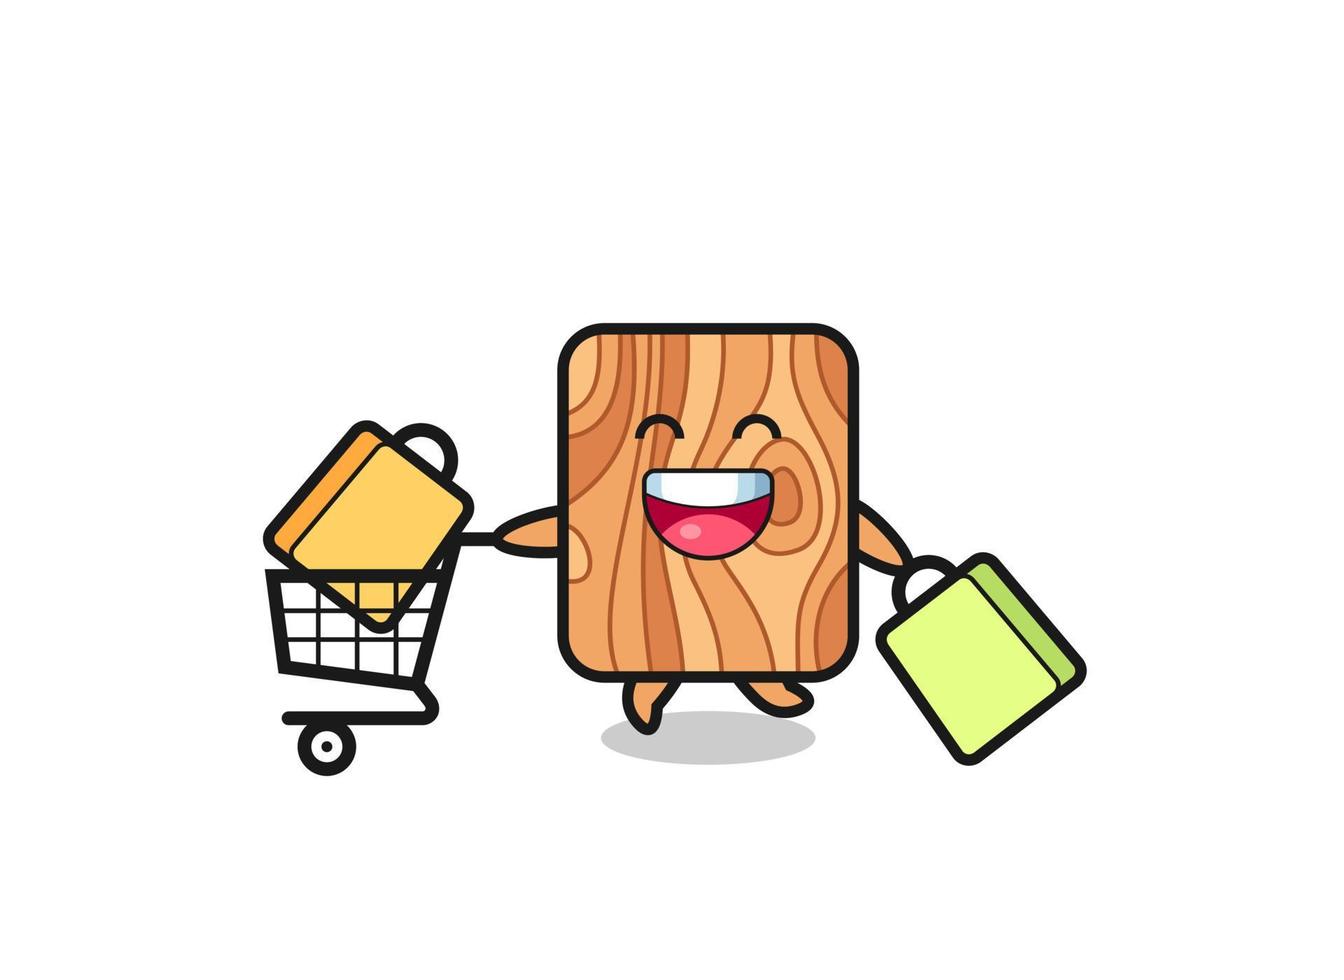 black Friday illustration with cute plank wood mascot vector